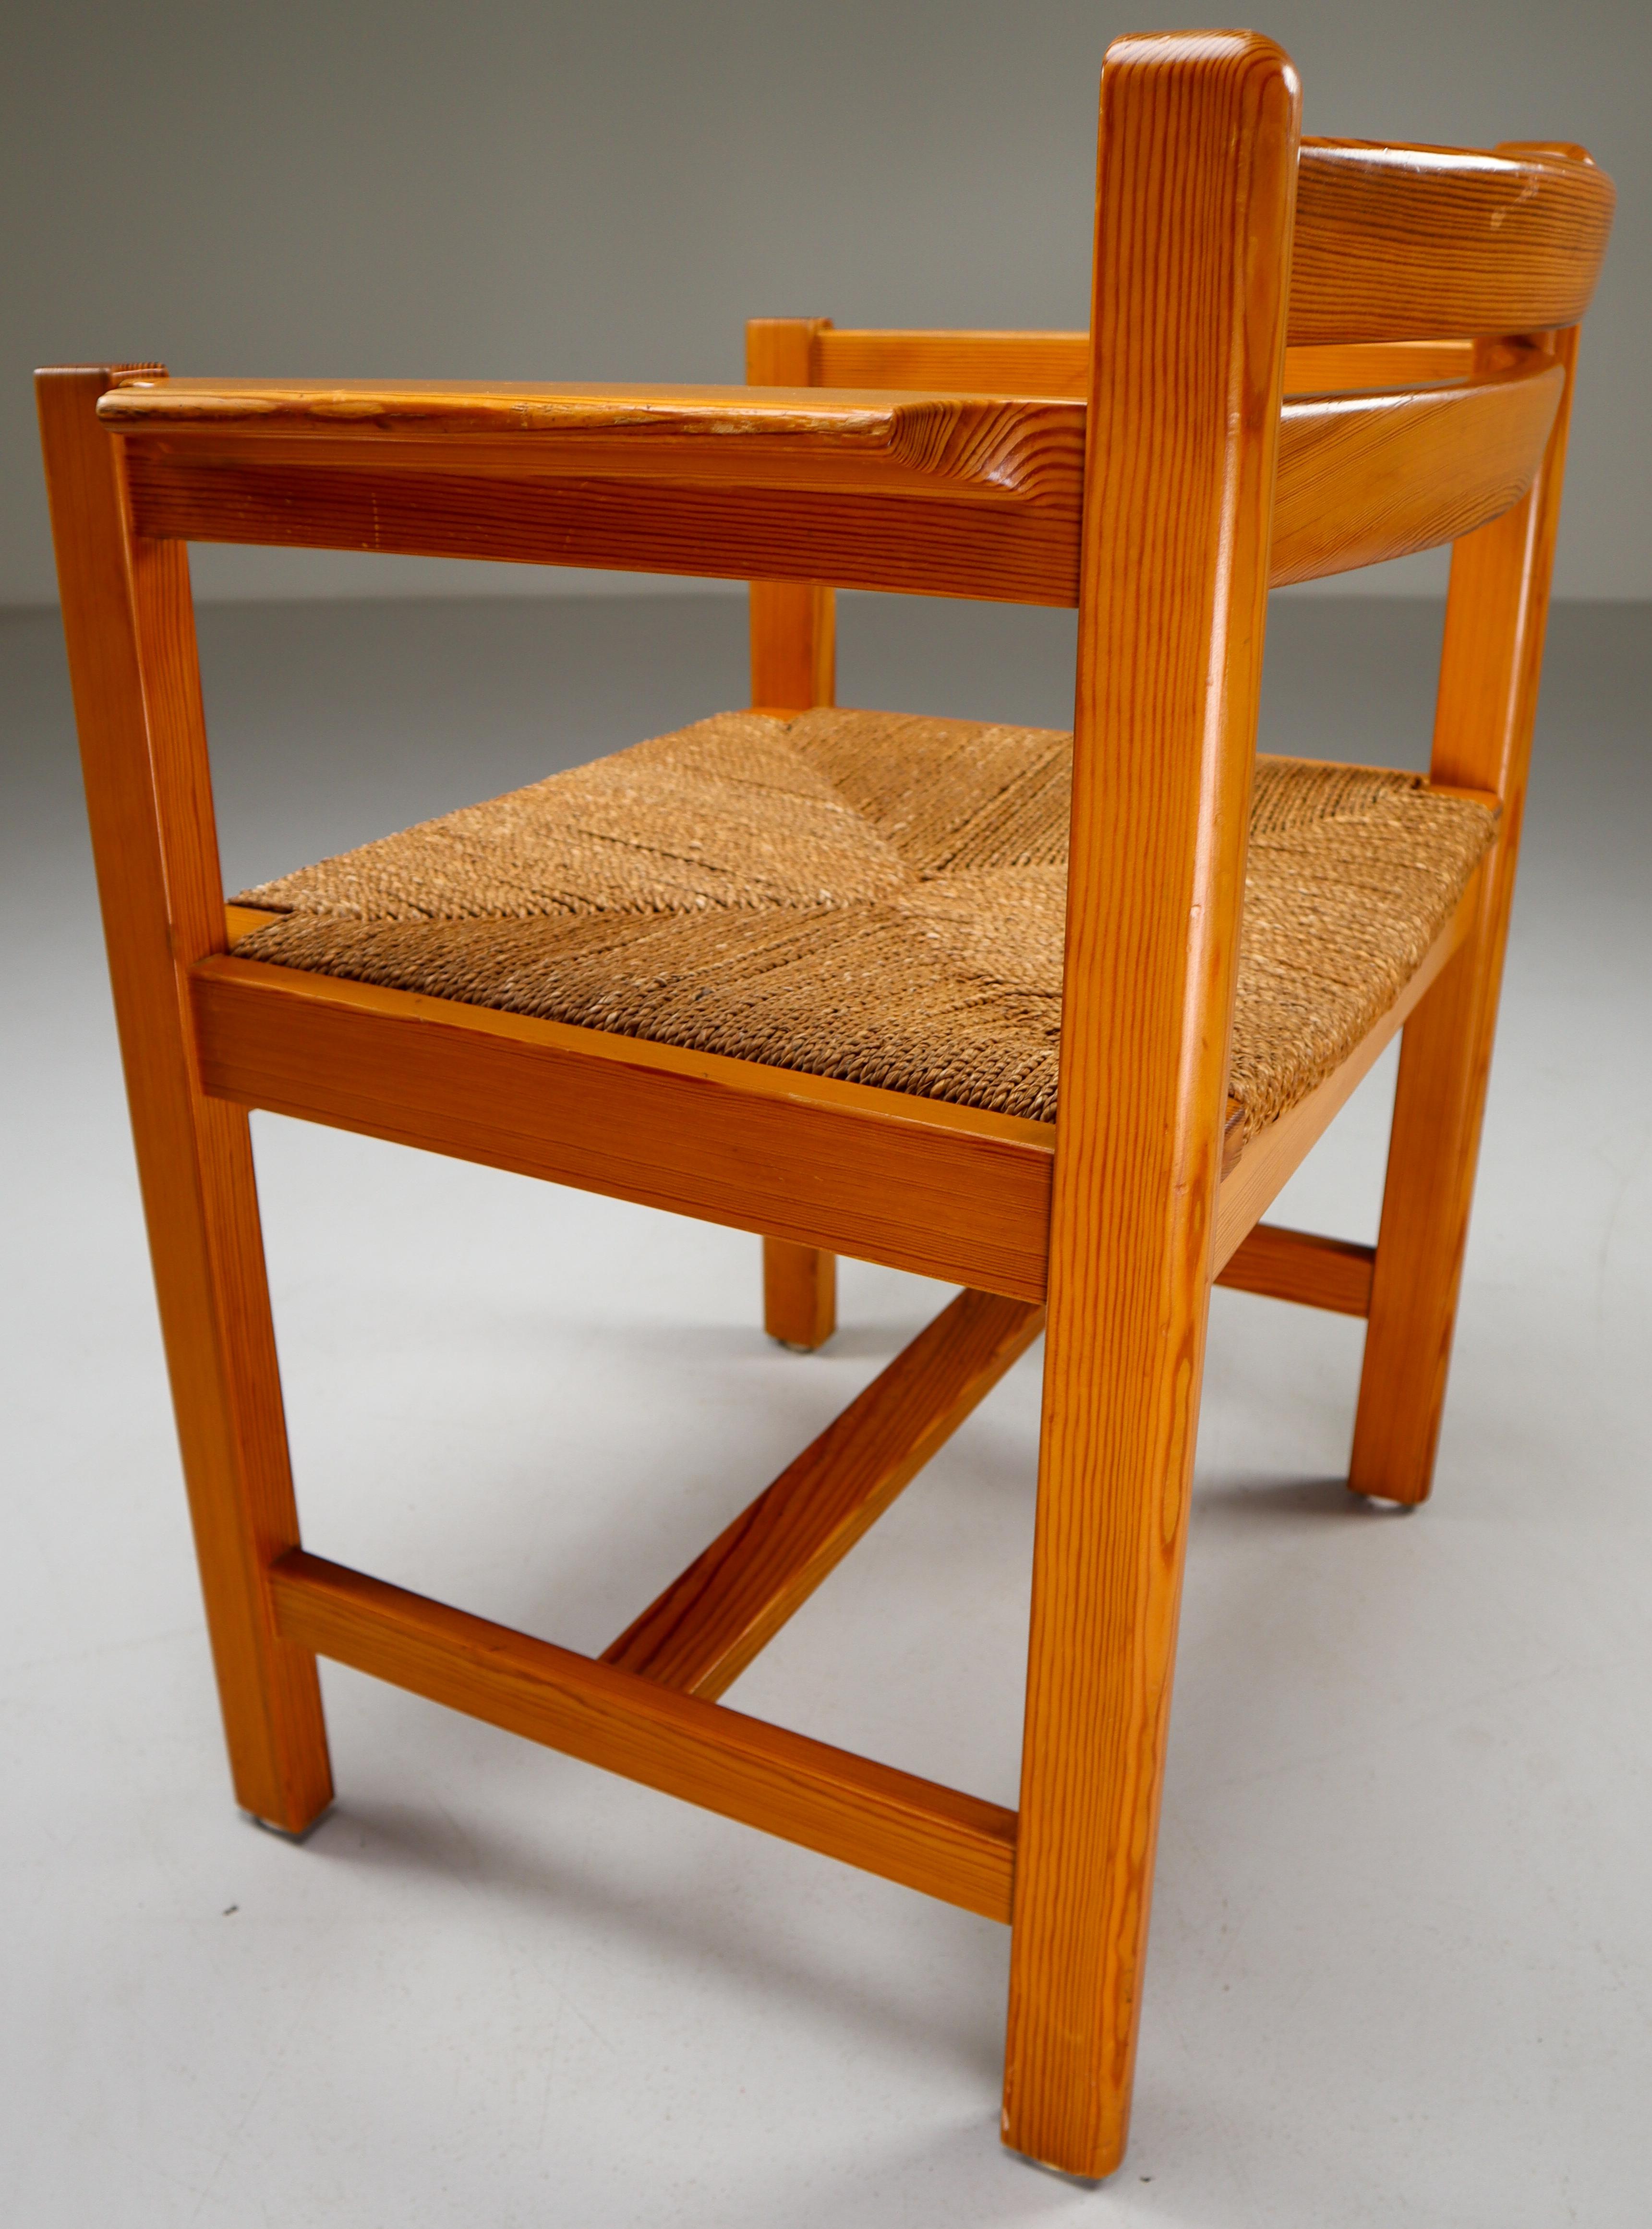 Mid-20th Century Four Asserbo Chairs by Børge Mogensen for AB Karl Andersson & Söner Sweden 1960s For Sale